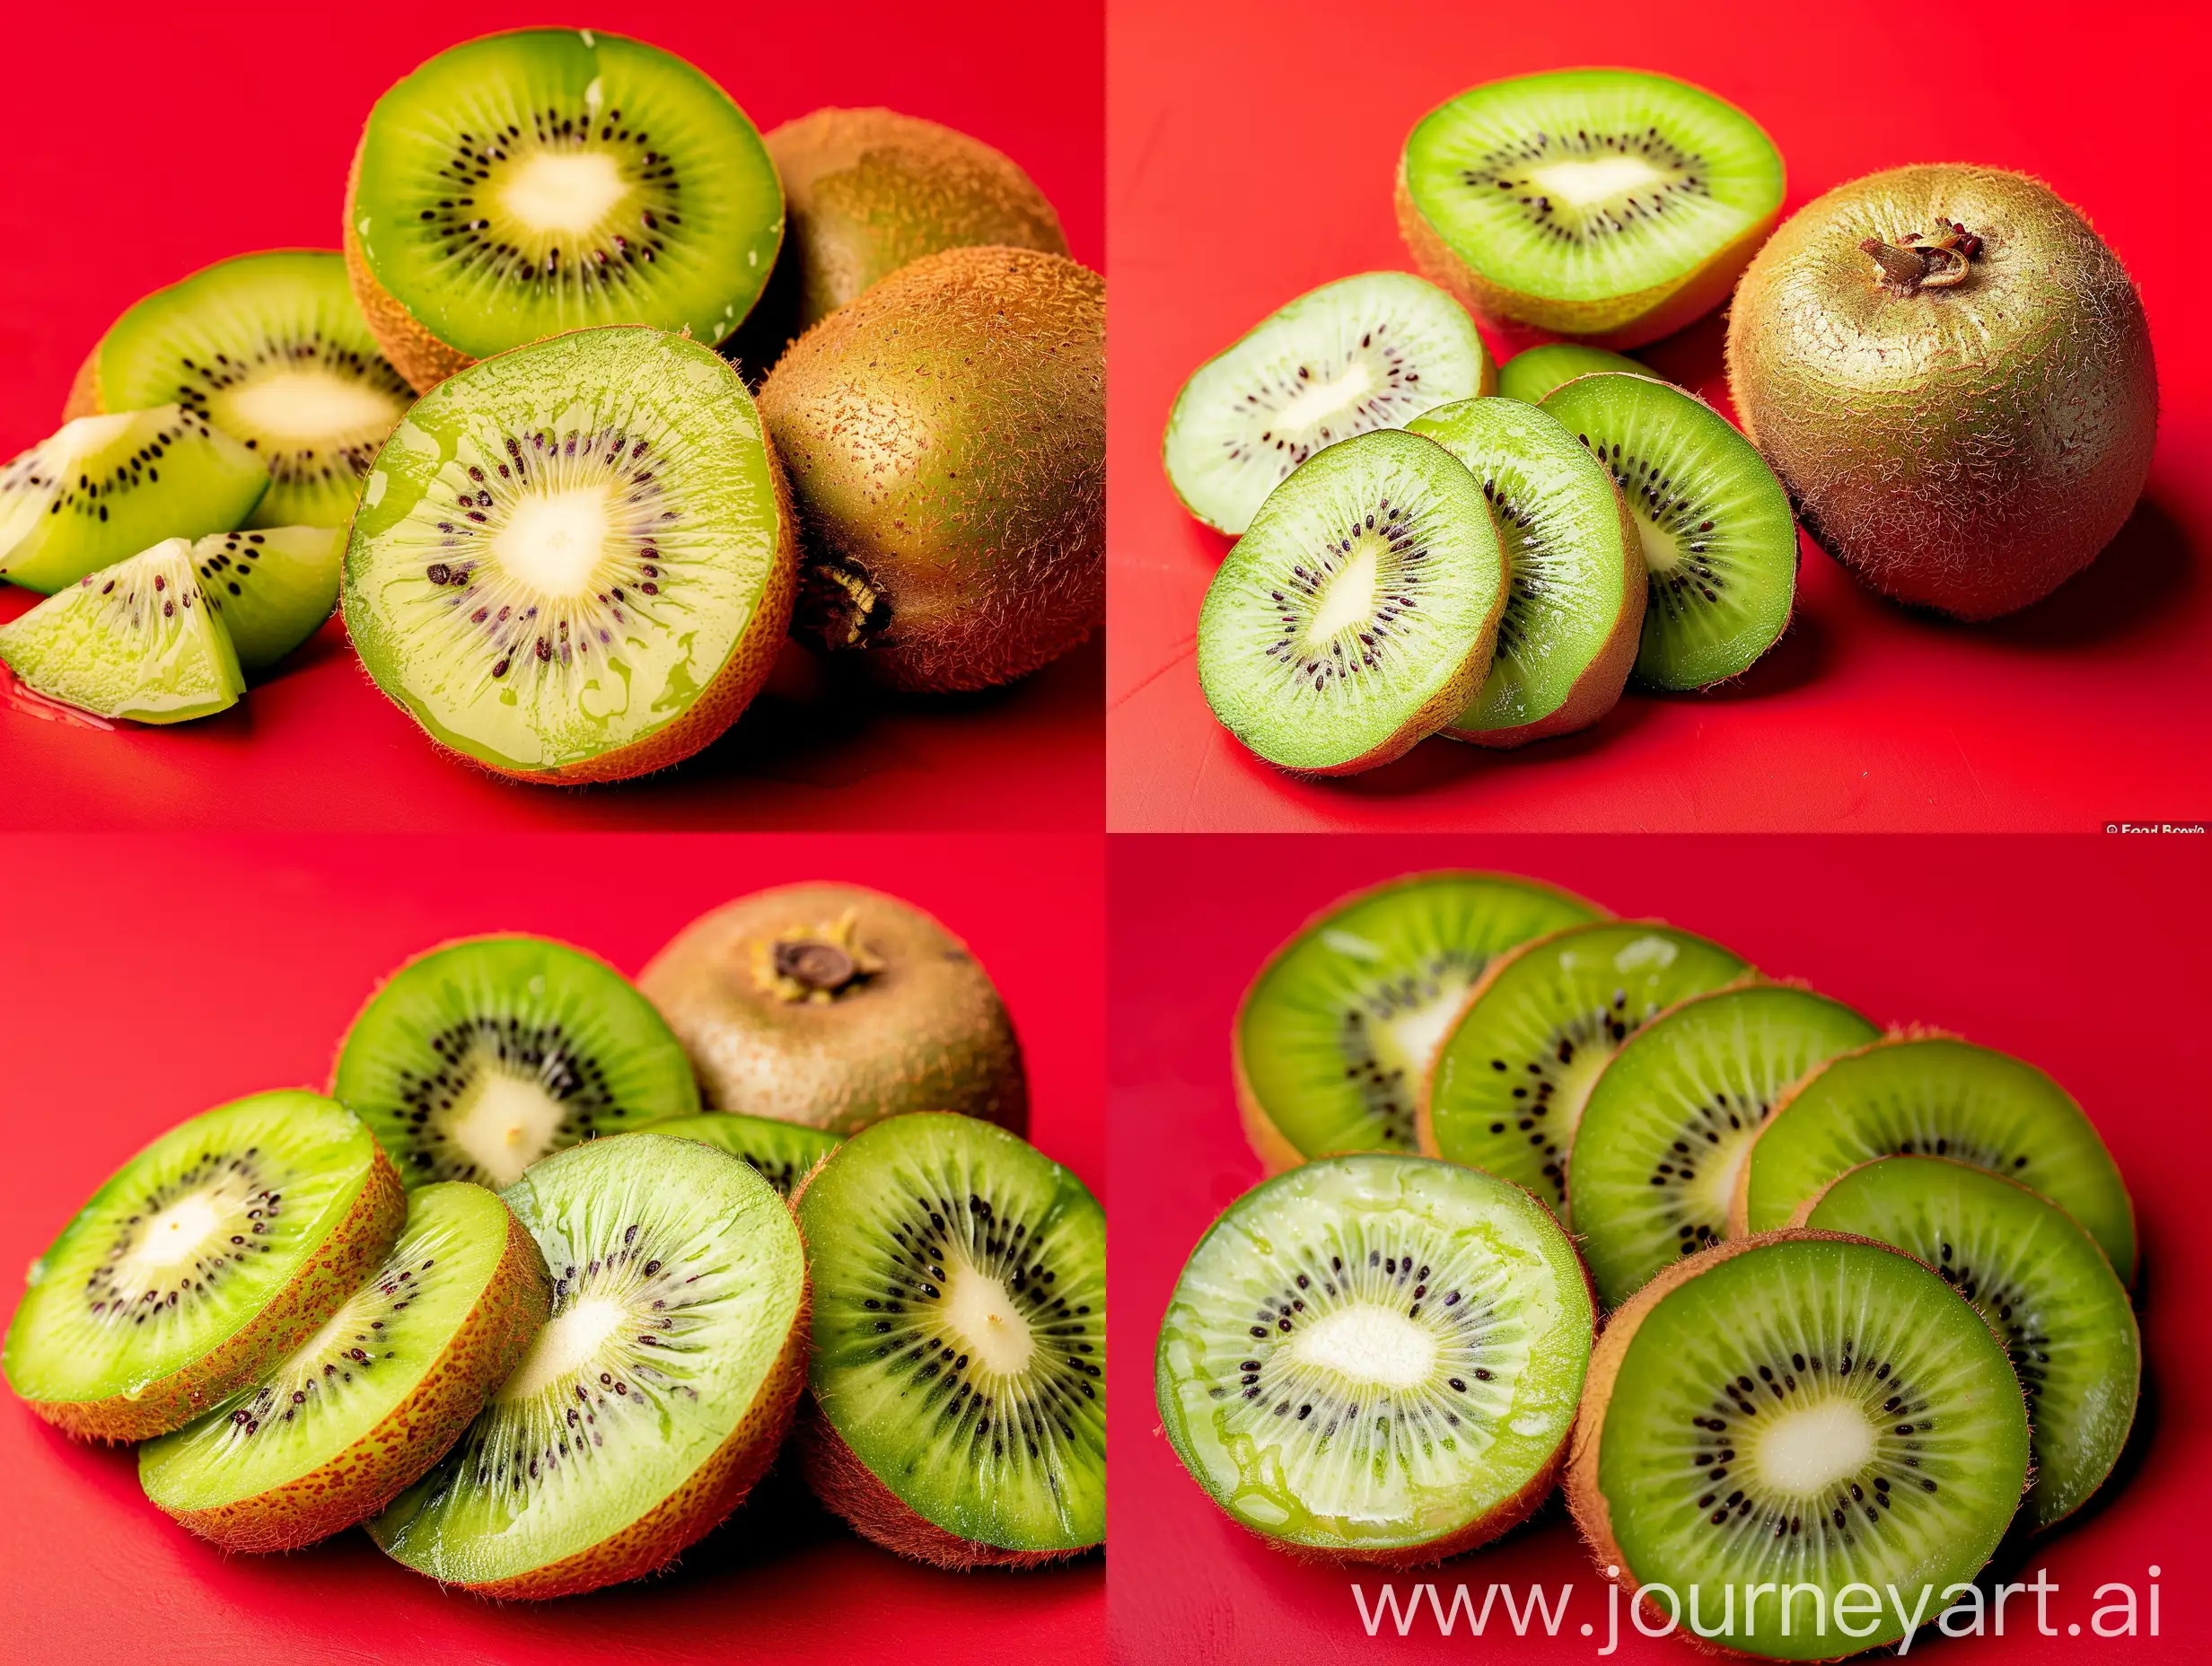 Real photo of kiwis with sliced pieces on red background